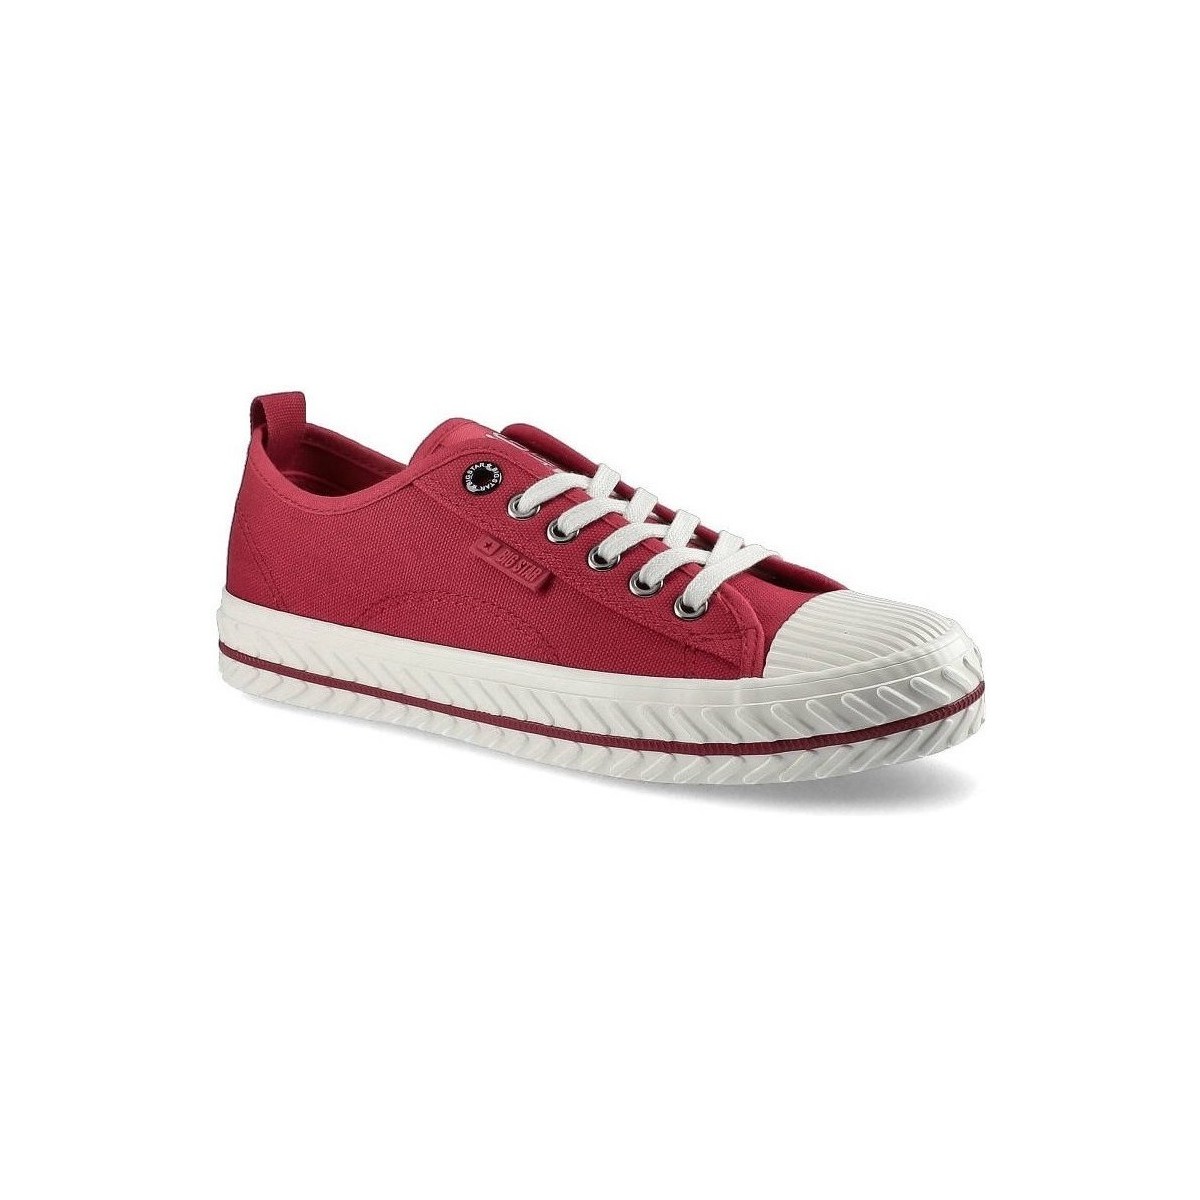 Chaussures Femme Baskets basses Big Star HH274189 Rouge